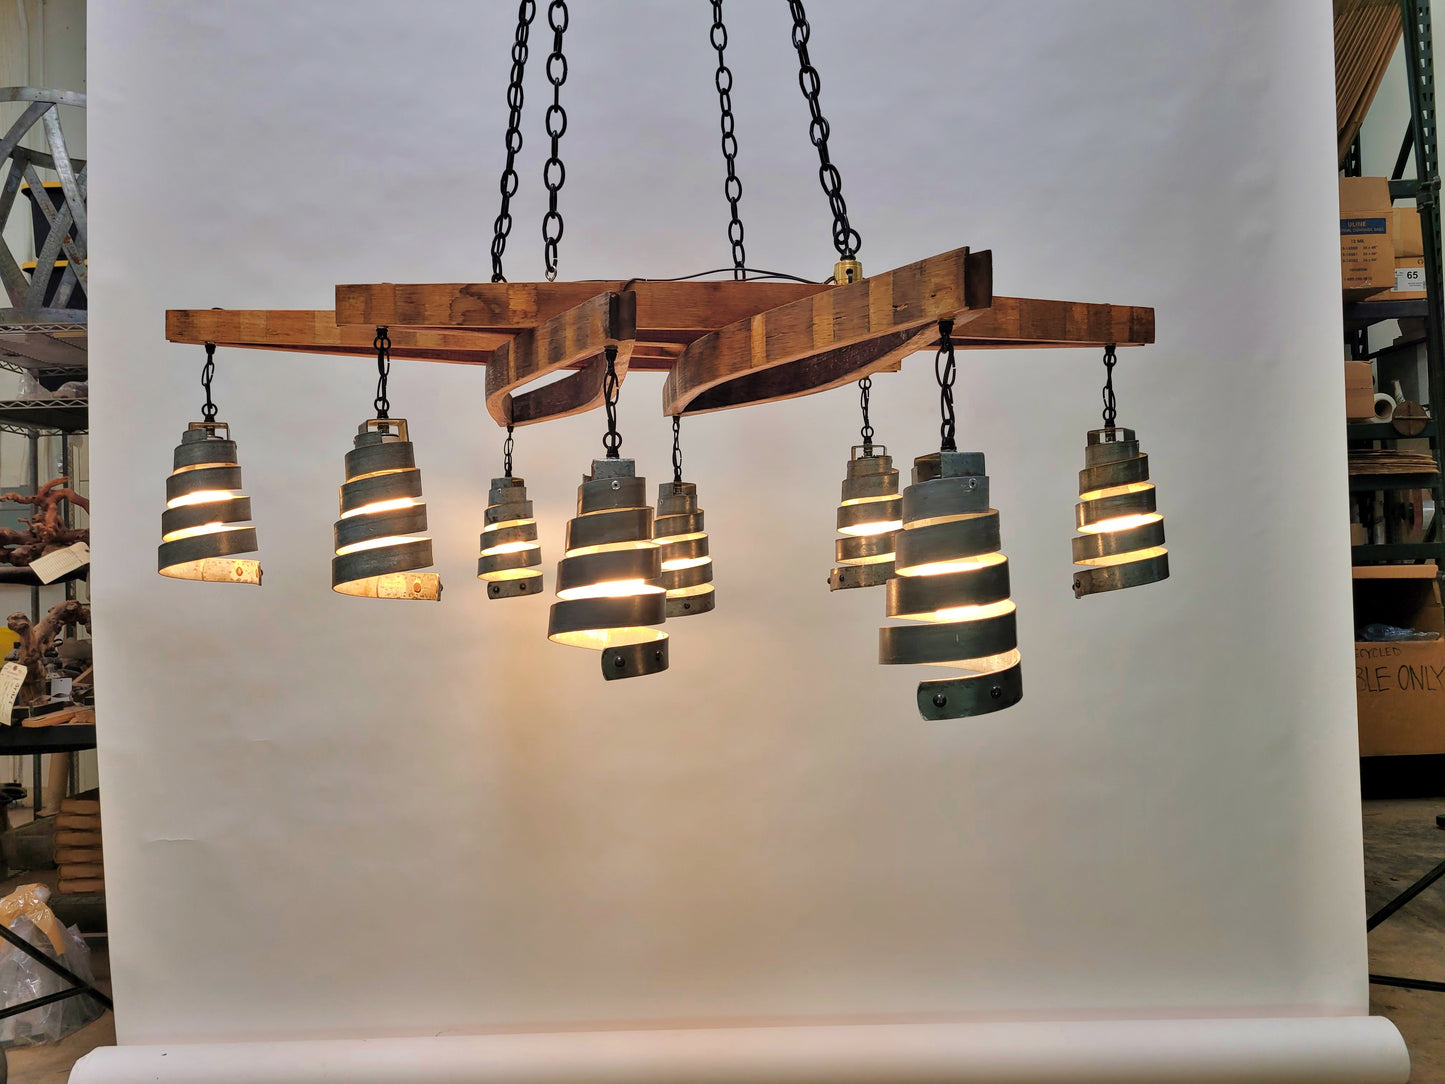 Wine Barrel Stave Chandelier with 8 Pendants - Cutat - Made from CA wine barrels. 100% recycled!